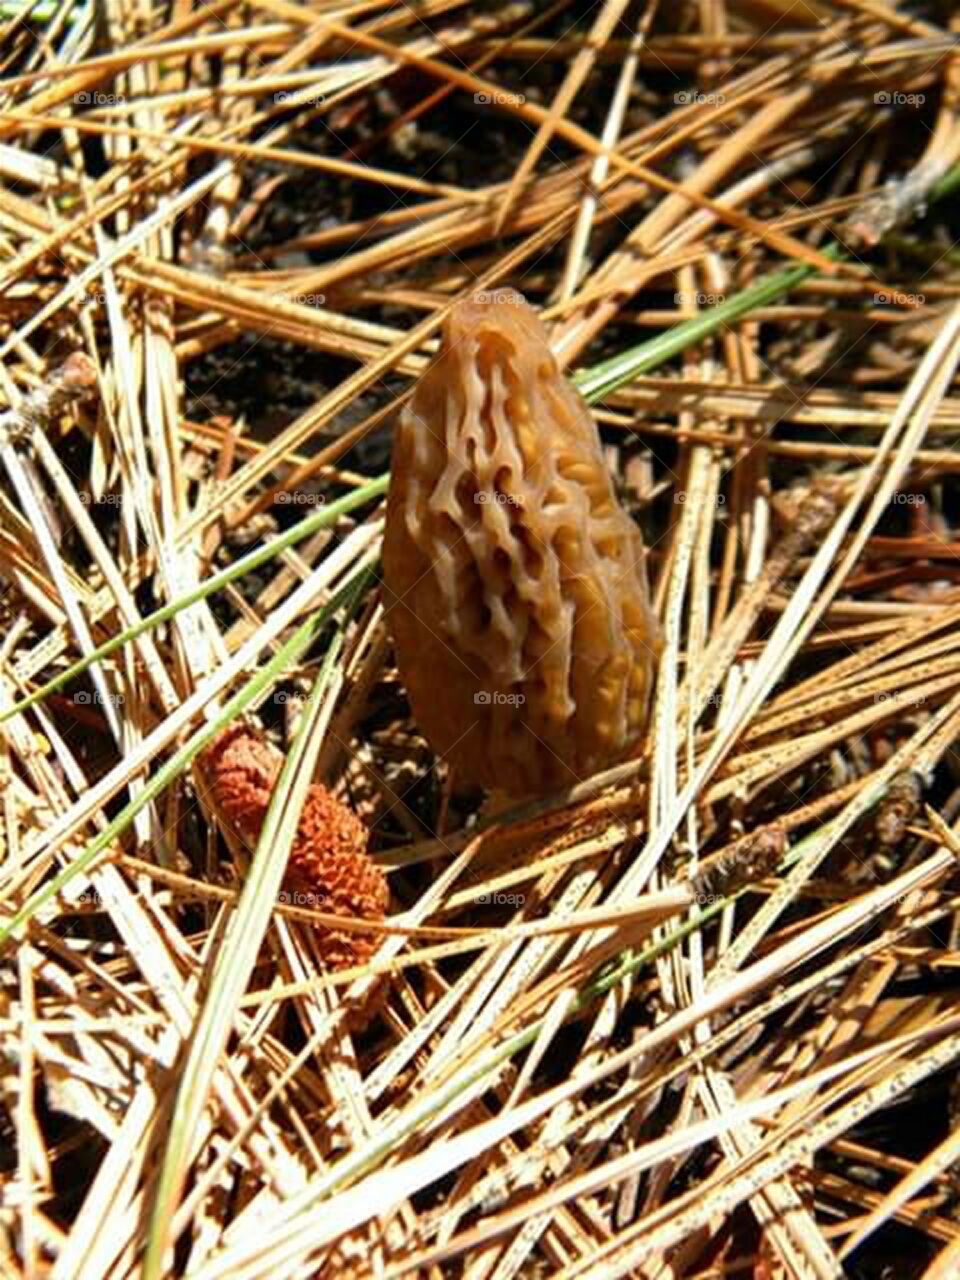 morel mushroom growing out of soil and pine needles